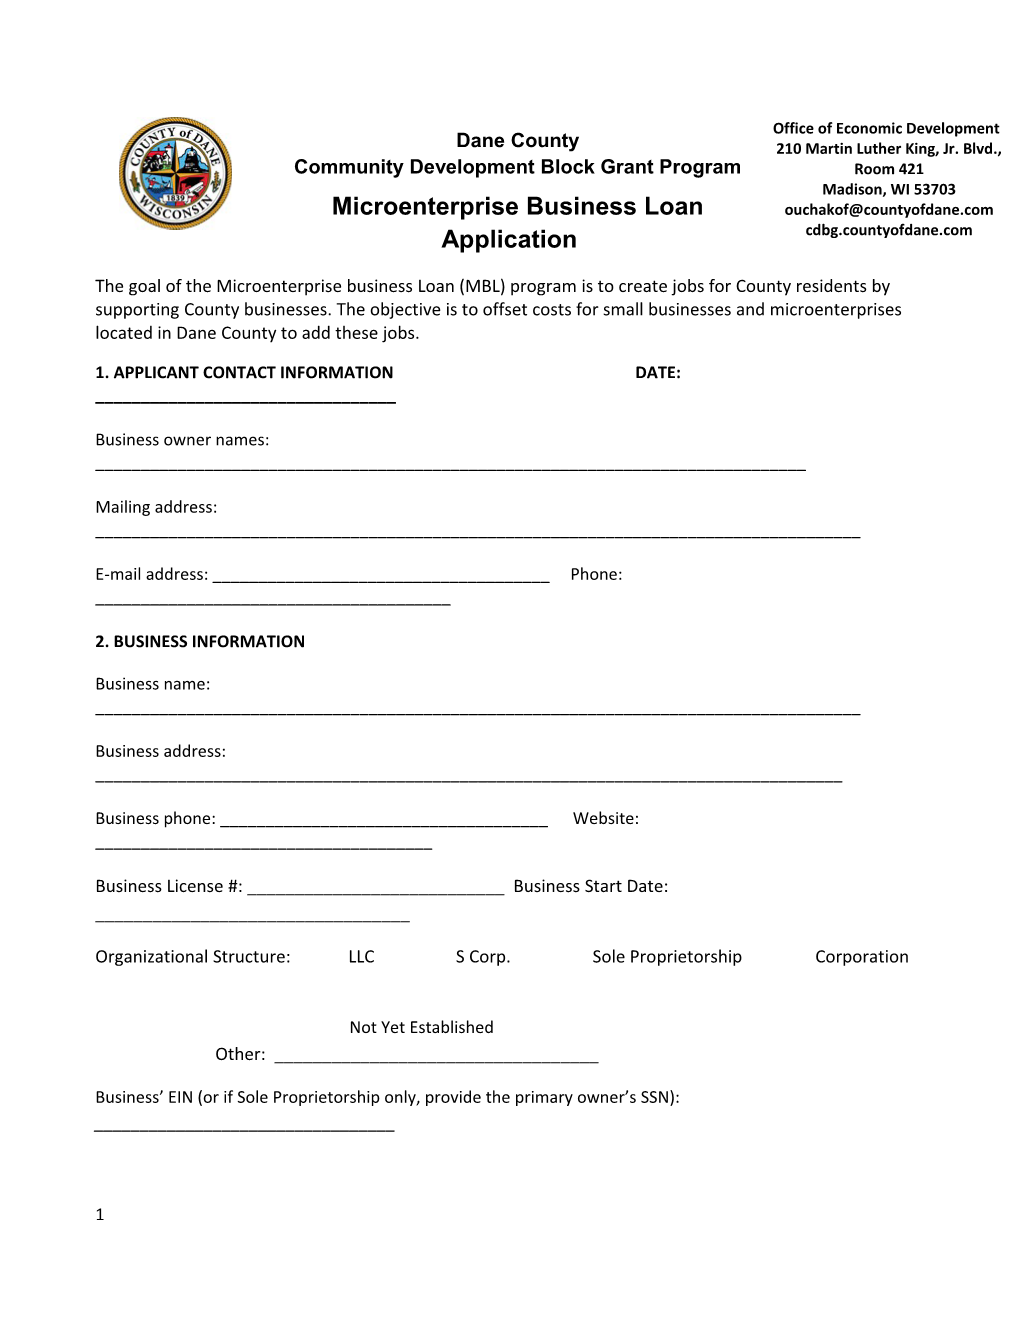 The Goal of the Microenterprise Business Loan (MBL) Program Is to Create Jobs for County